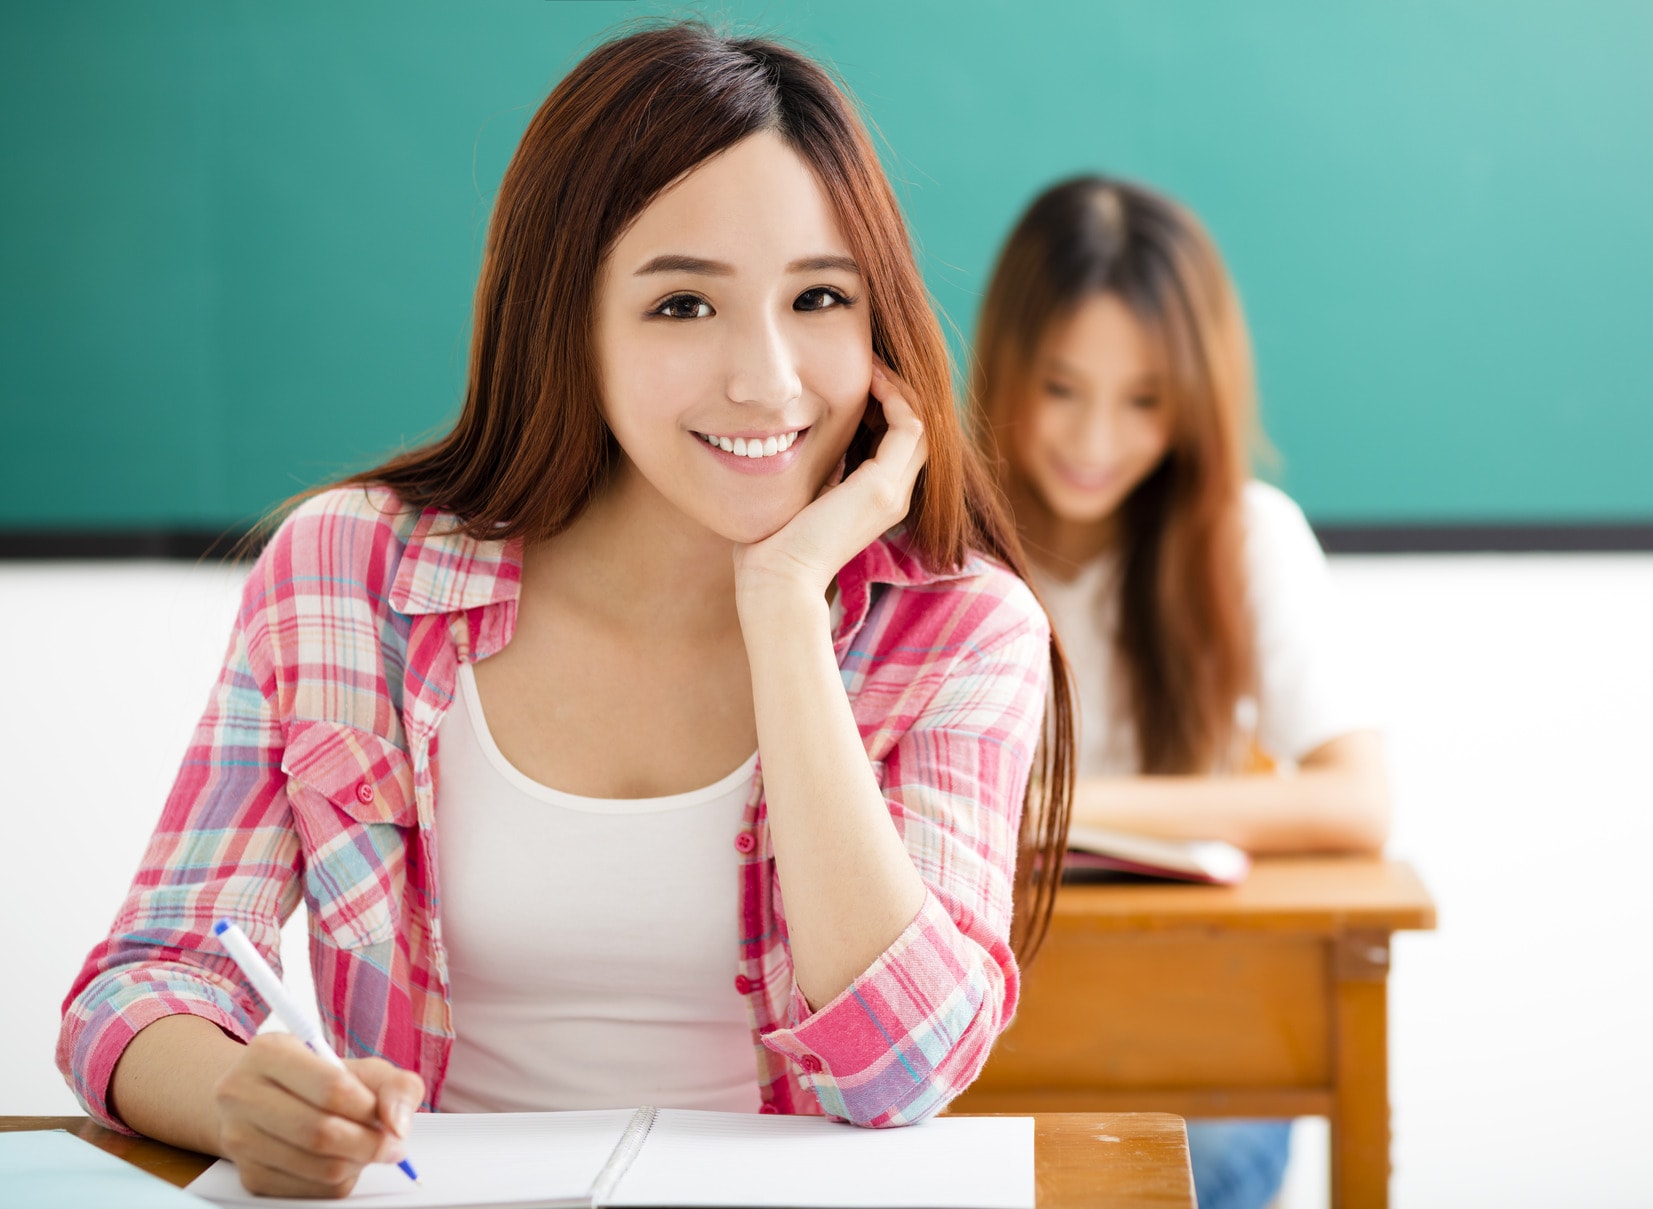 photodune-12929482-smiling-young-student-with-others-in-the-classroom-m-min